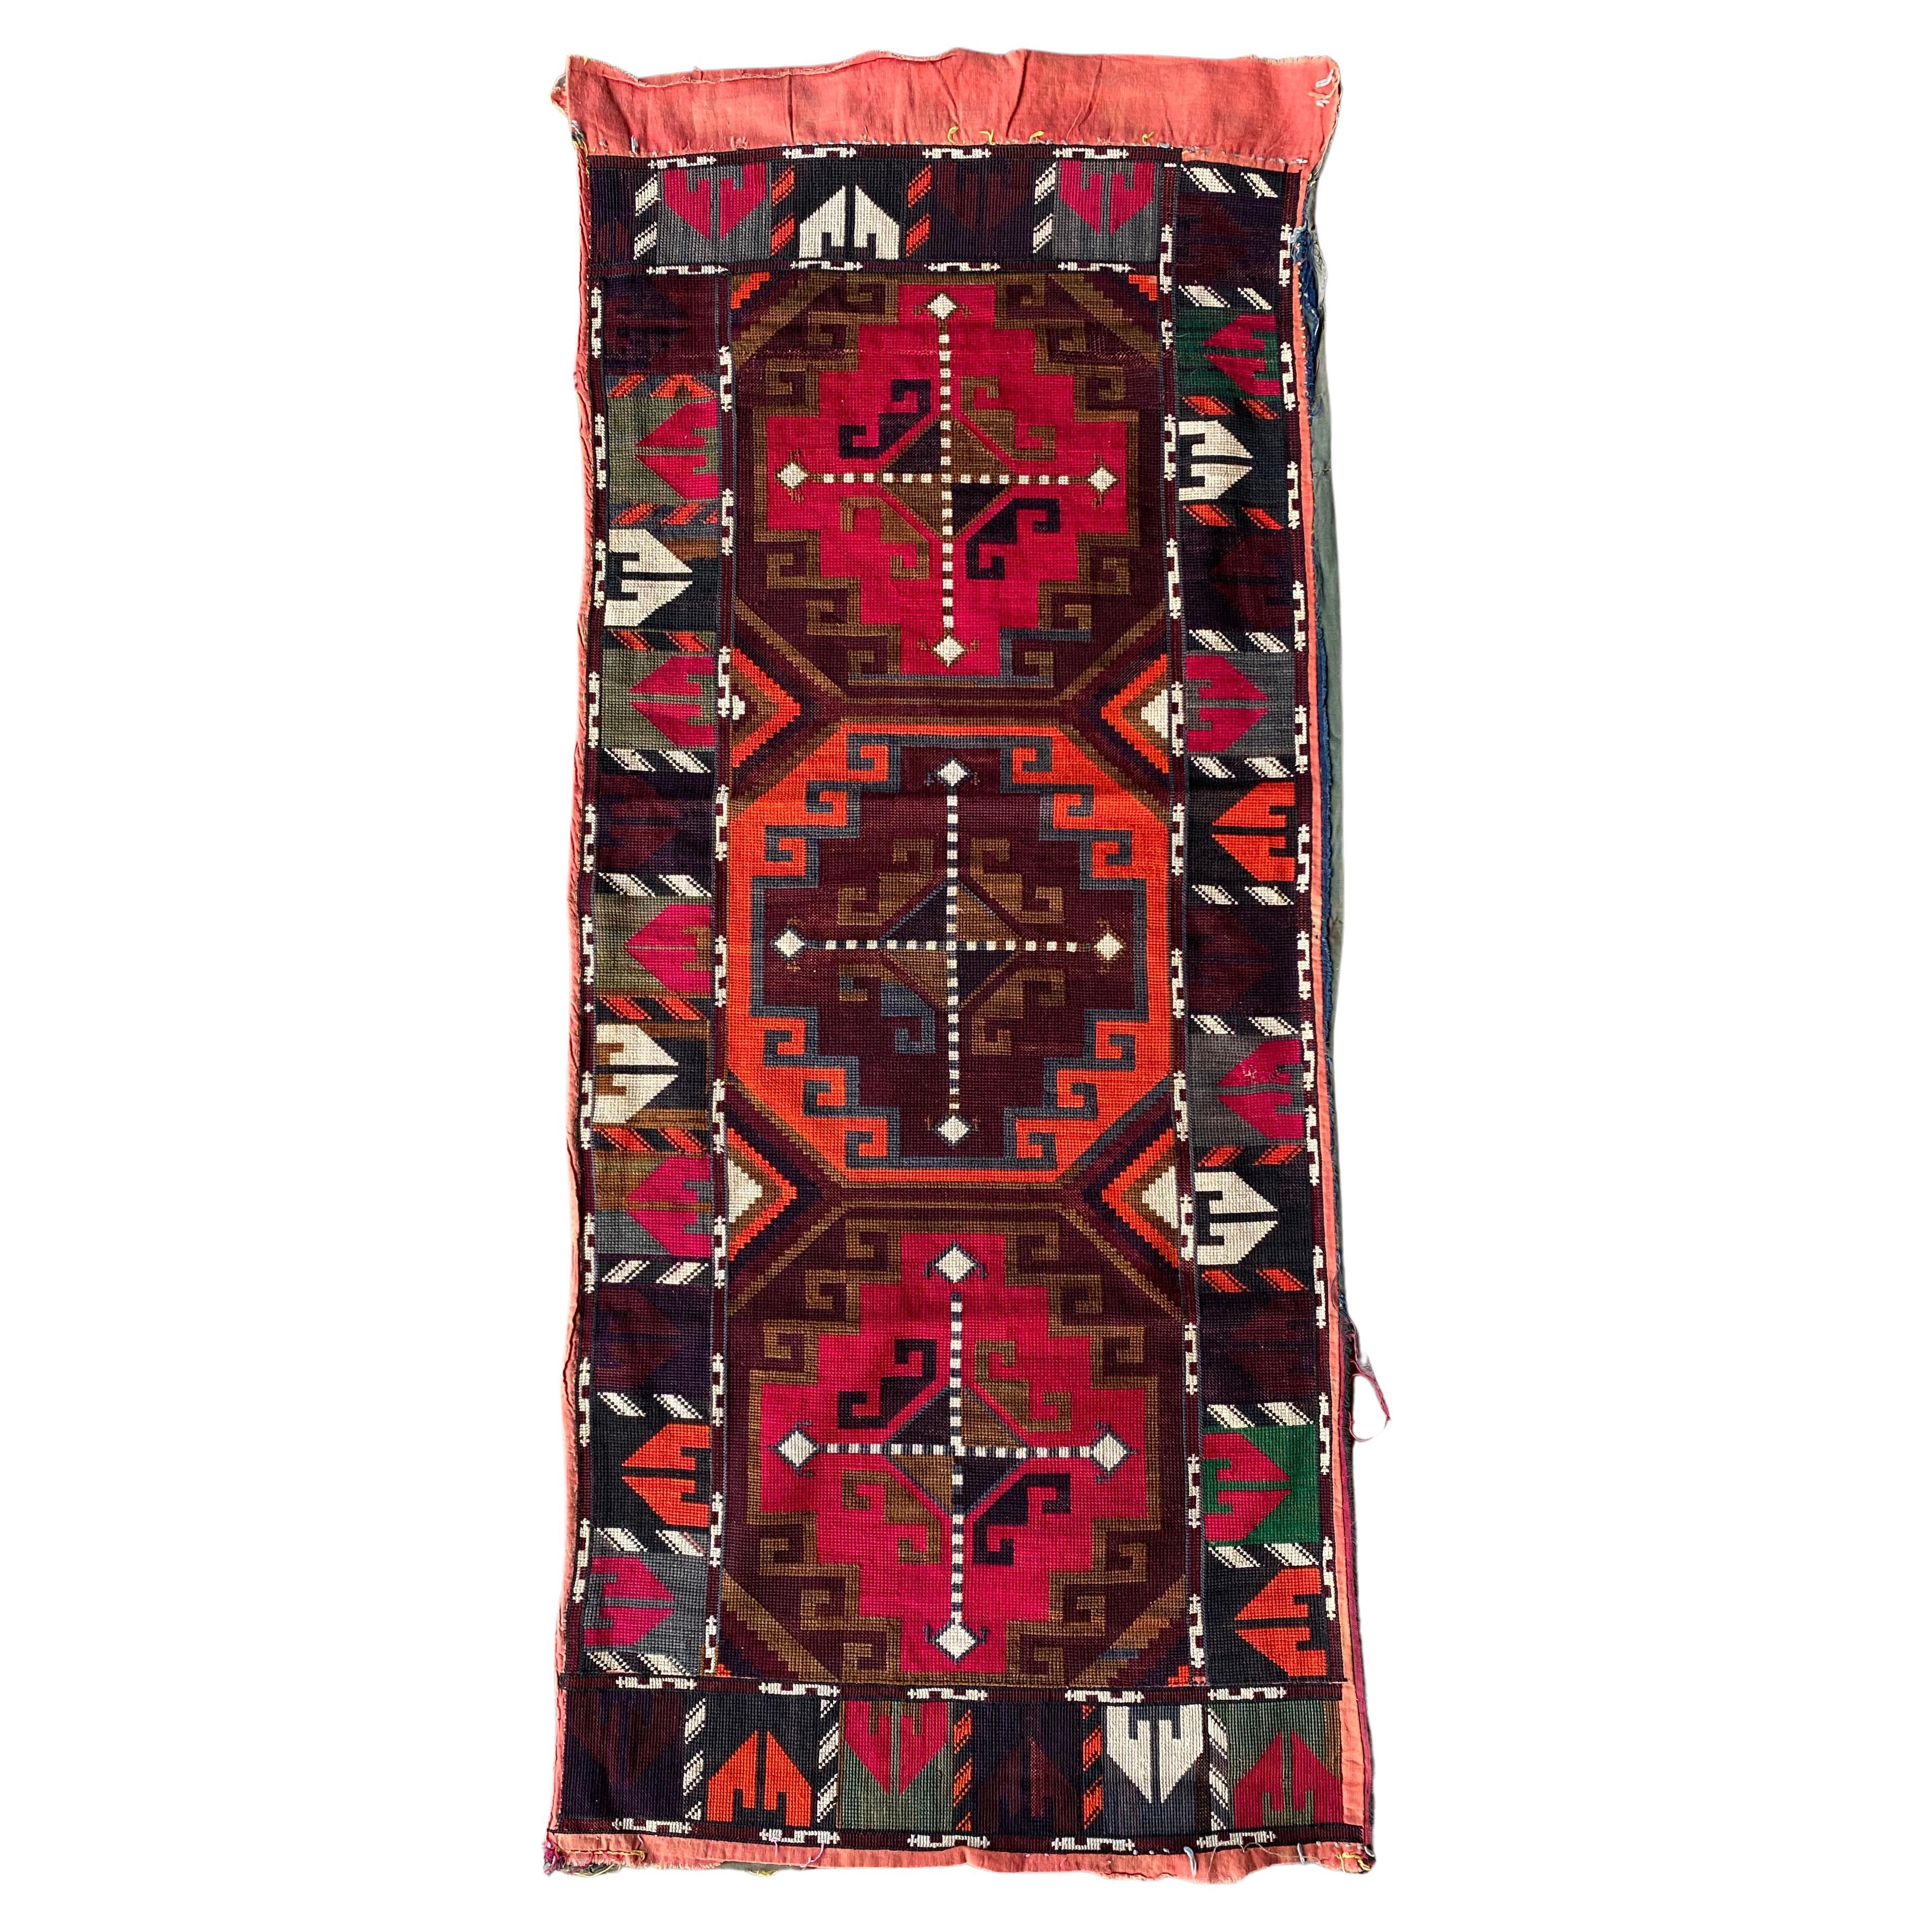 Central Asian Embroidered Textile, “Suzani”, Mid 20th Century